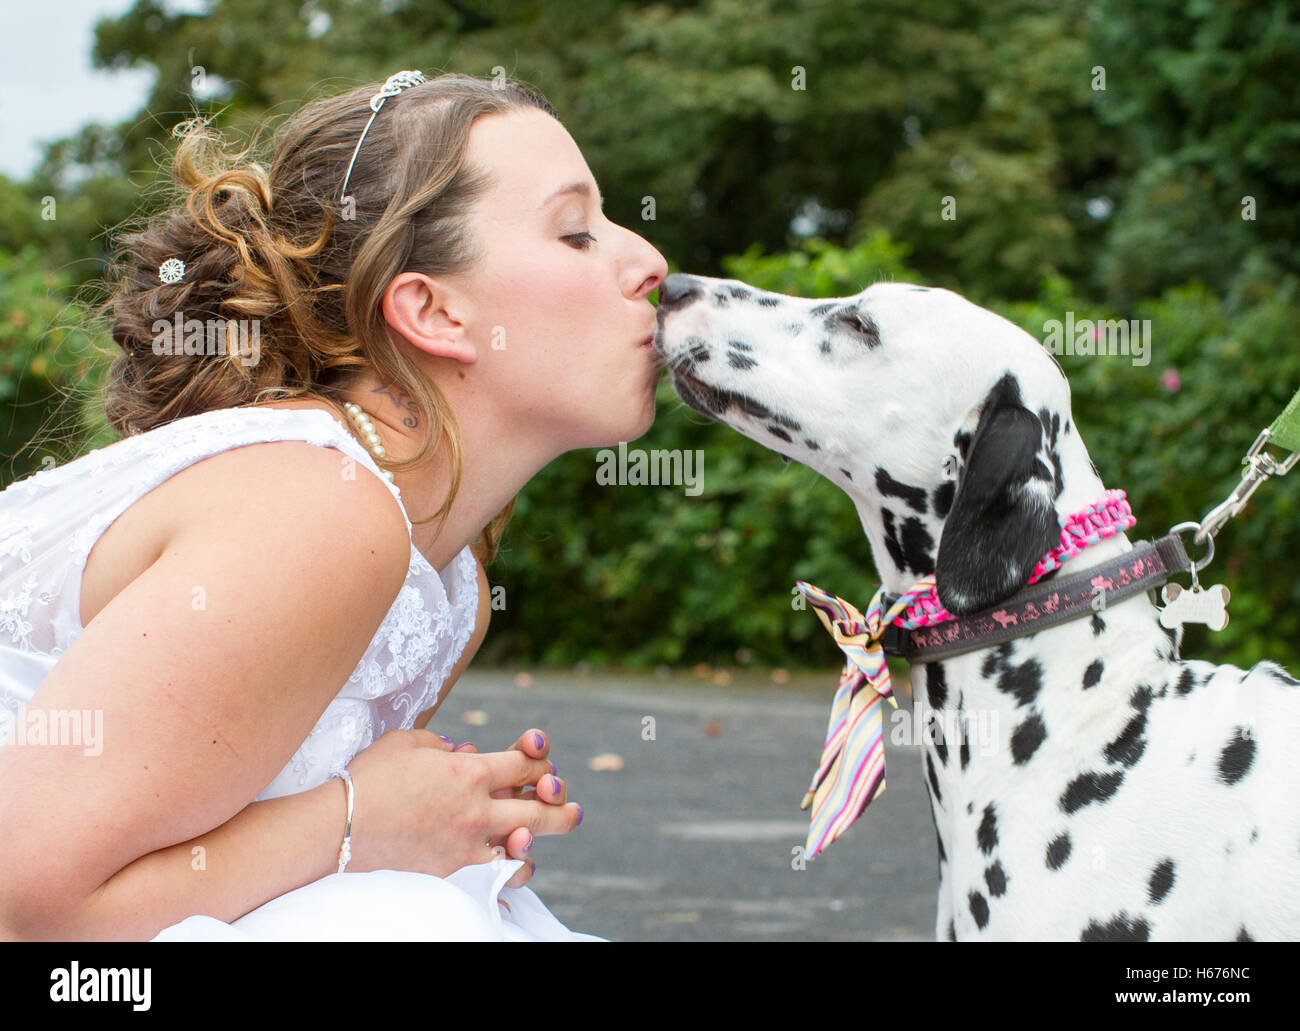 Beautiful young bride rubs noses and has kisses with her faithful dog companion on her wedding day. Dog has lead and collar Stock Photo